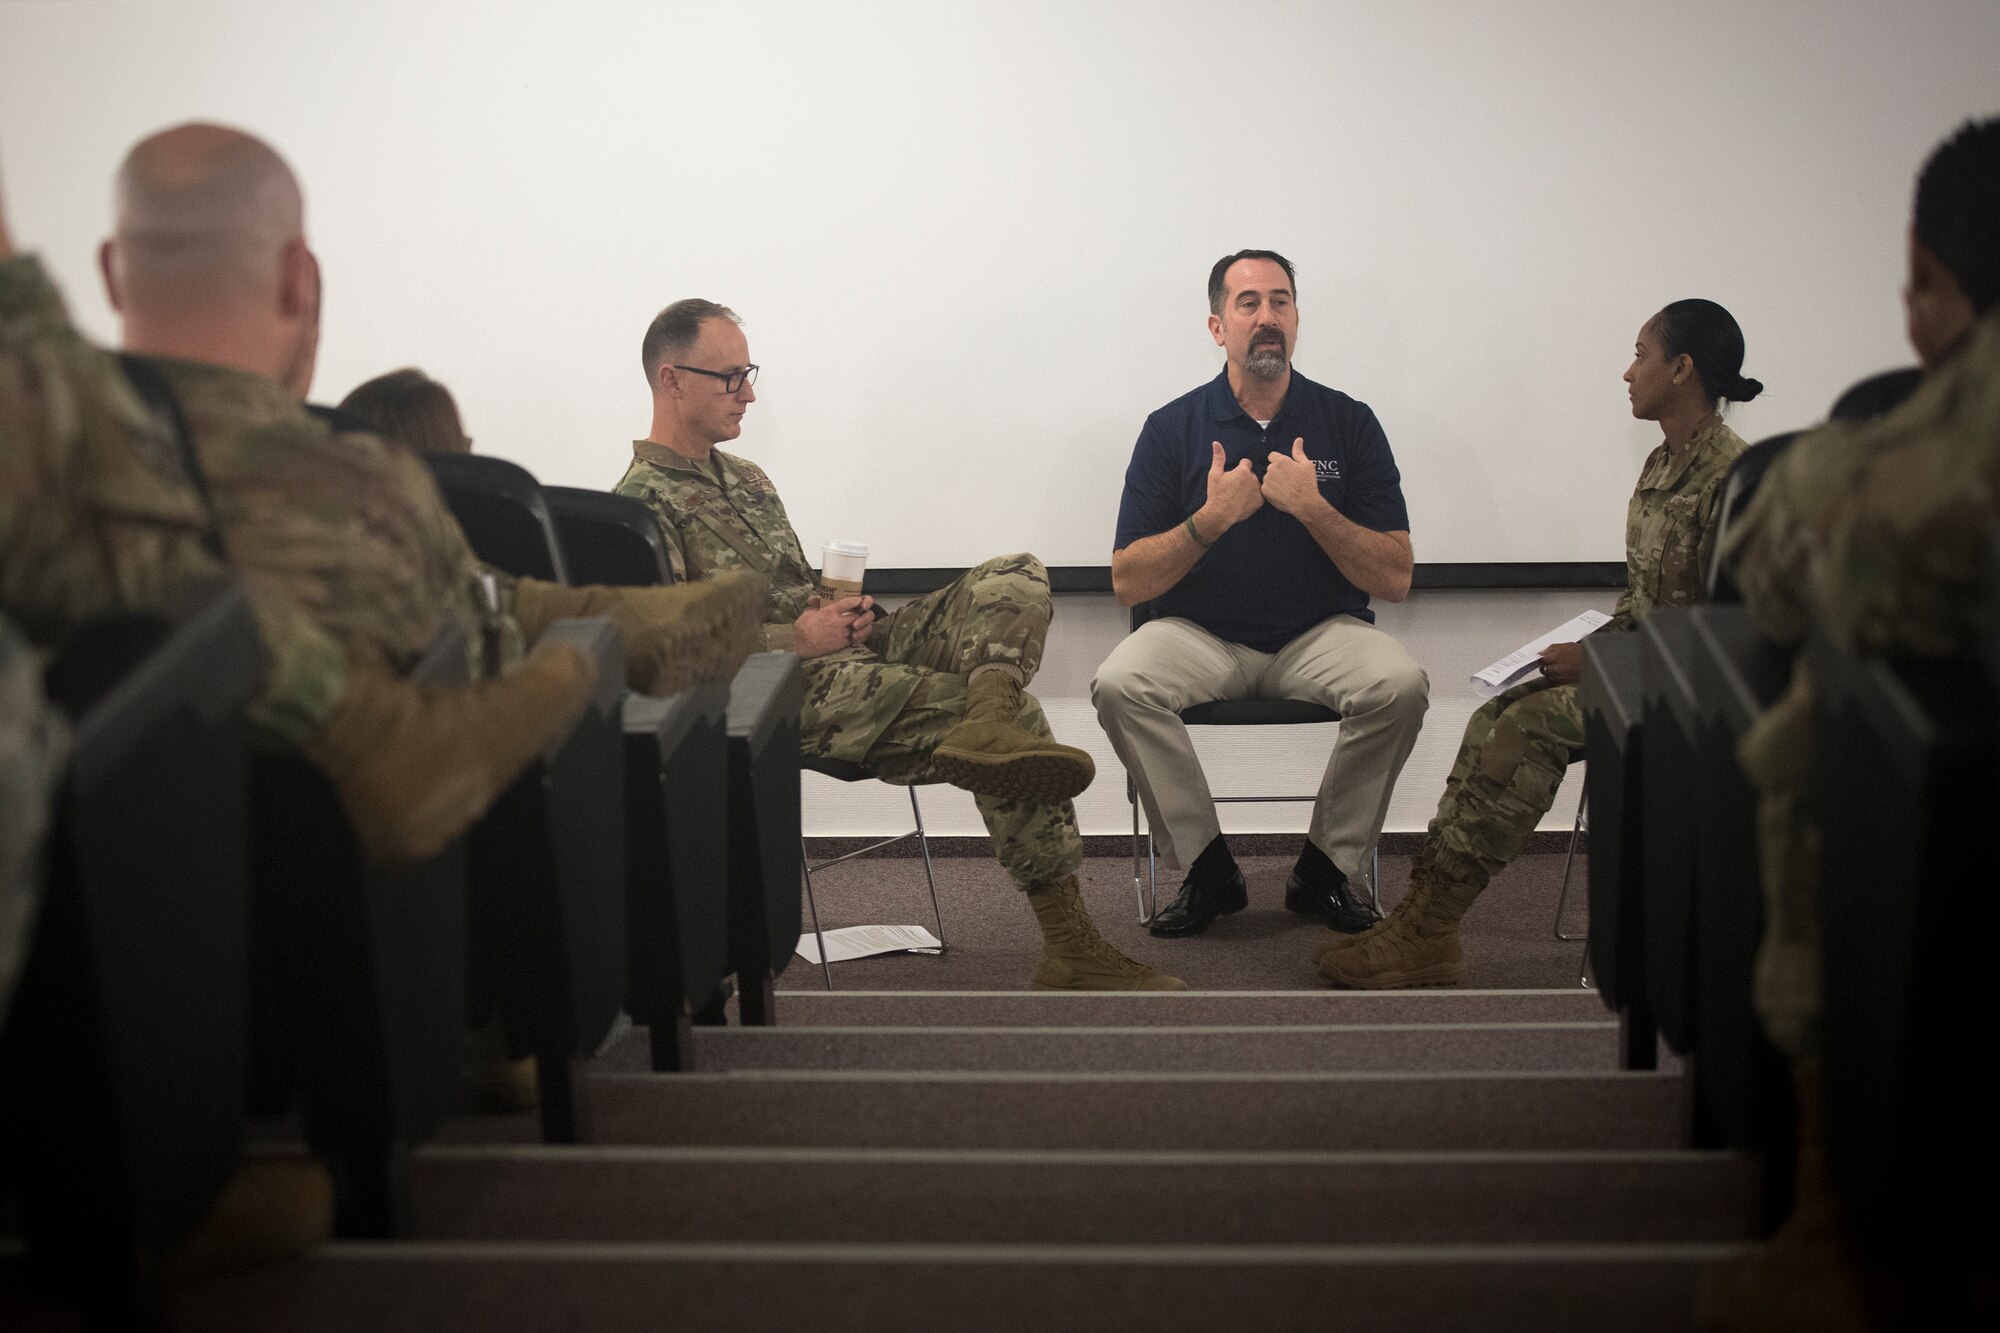 Paul Firman, chief of dispute resolution education and training, provides an example of opening statements for formal mediation during the Alternate Dispute Resolution training at the U.S. Air Forces in Europe and Air Forces Africa Conference Center, Ramstein Air Base, Germany, Dec. 4, 2019.